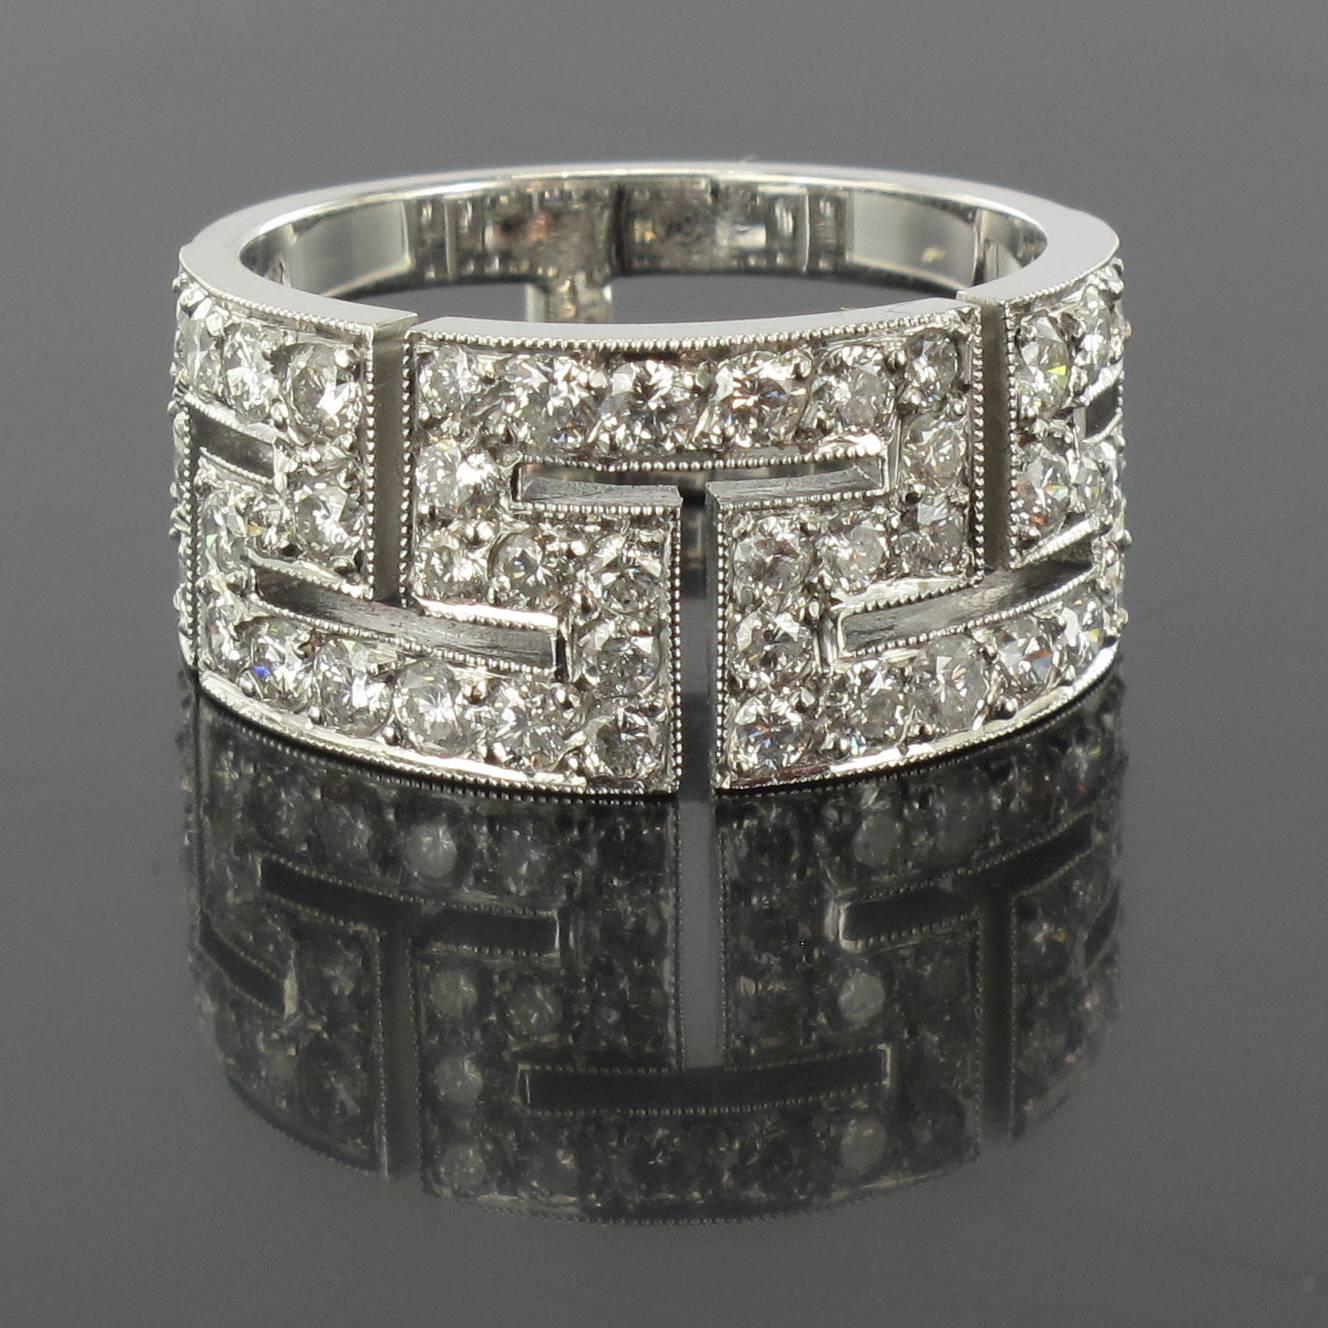 Ring in 18 carat white gold, eagle head hallmark. 

Composed of a double flat band with the front portraying a geometric design set with brilliant cut diamonds. 

Total weight of diamonds: 1.47 carats approximately.
Height: 1.7 cm, ring base